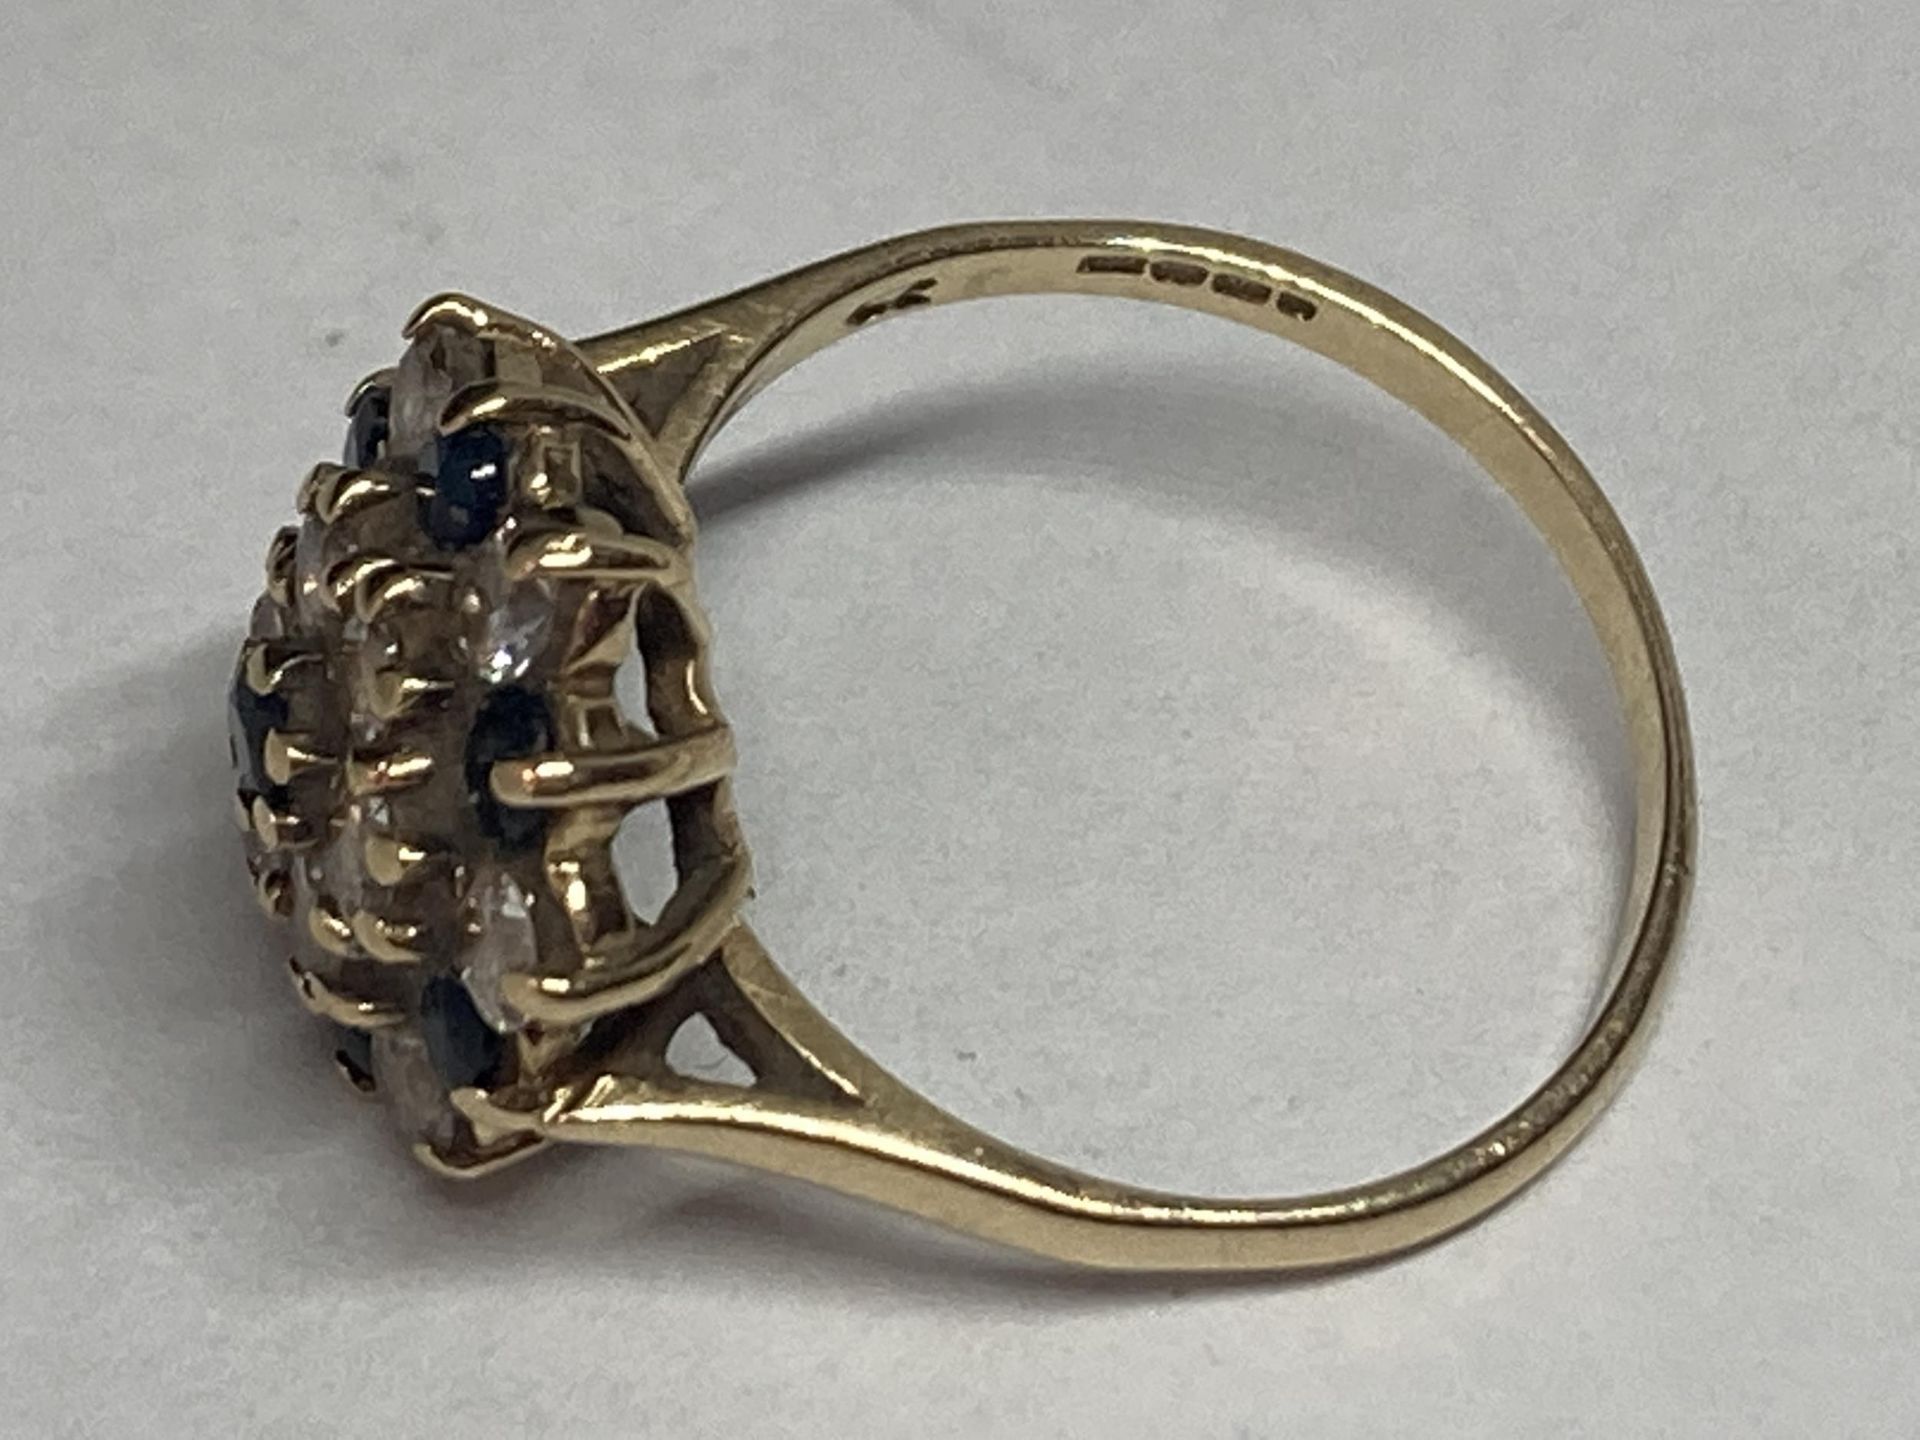 A 9 CARAT GOLD RING WITH SAPPHIRES AND CUBIC ZIRCONIAS IN A CLUSTER DESIGN M/N - Image 2 of 4